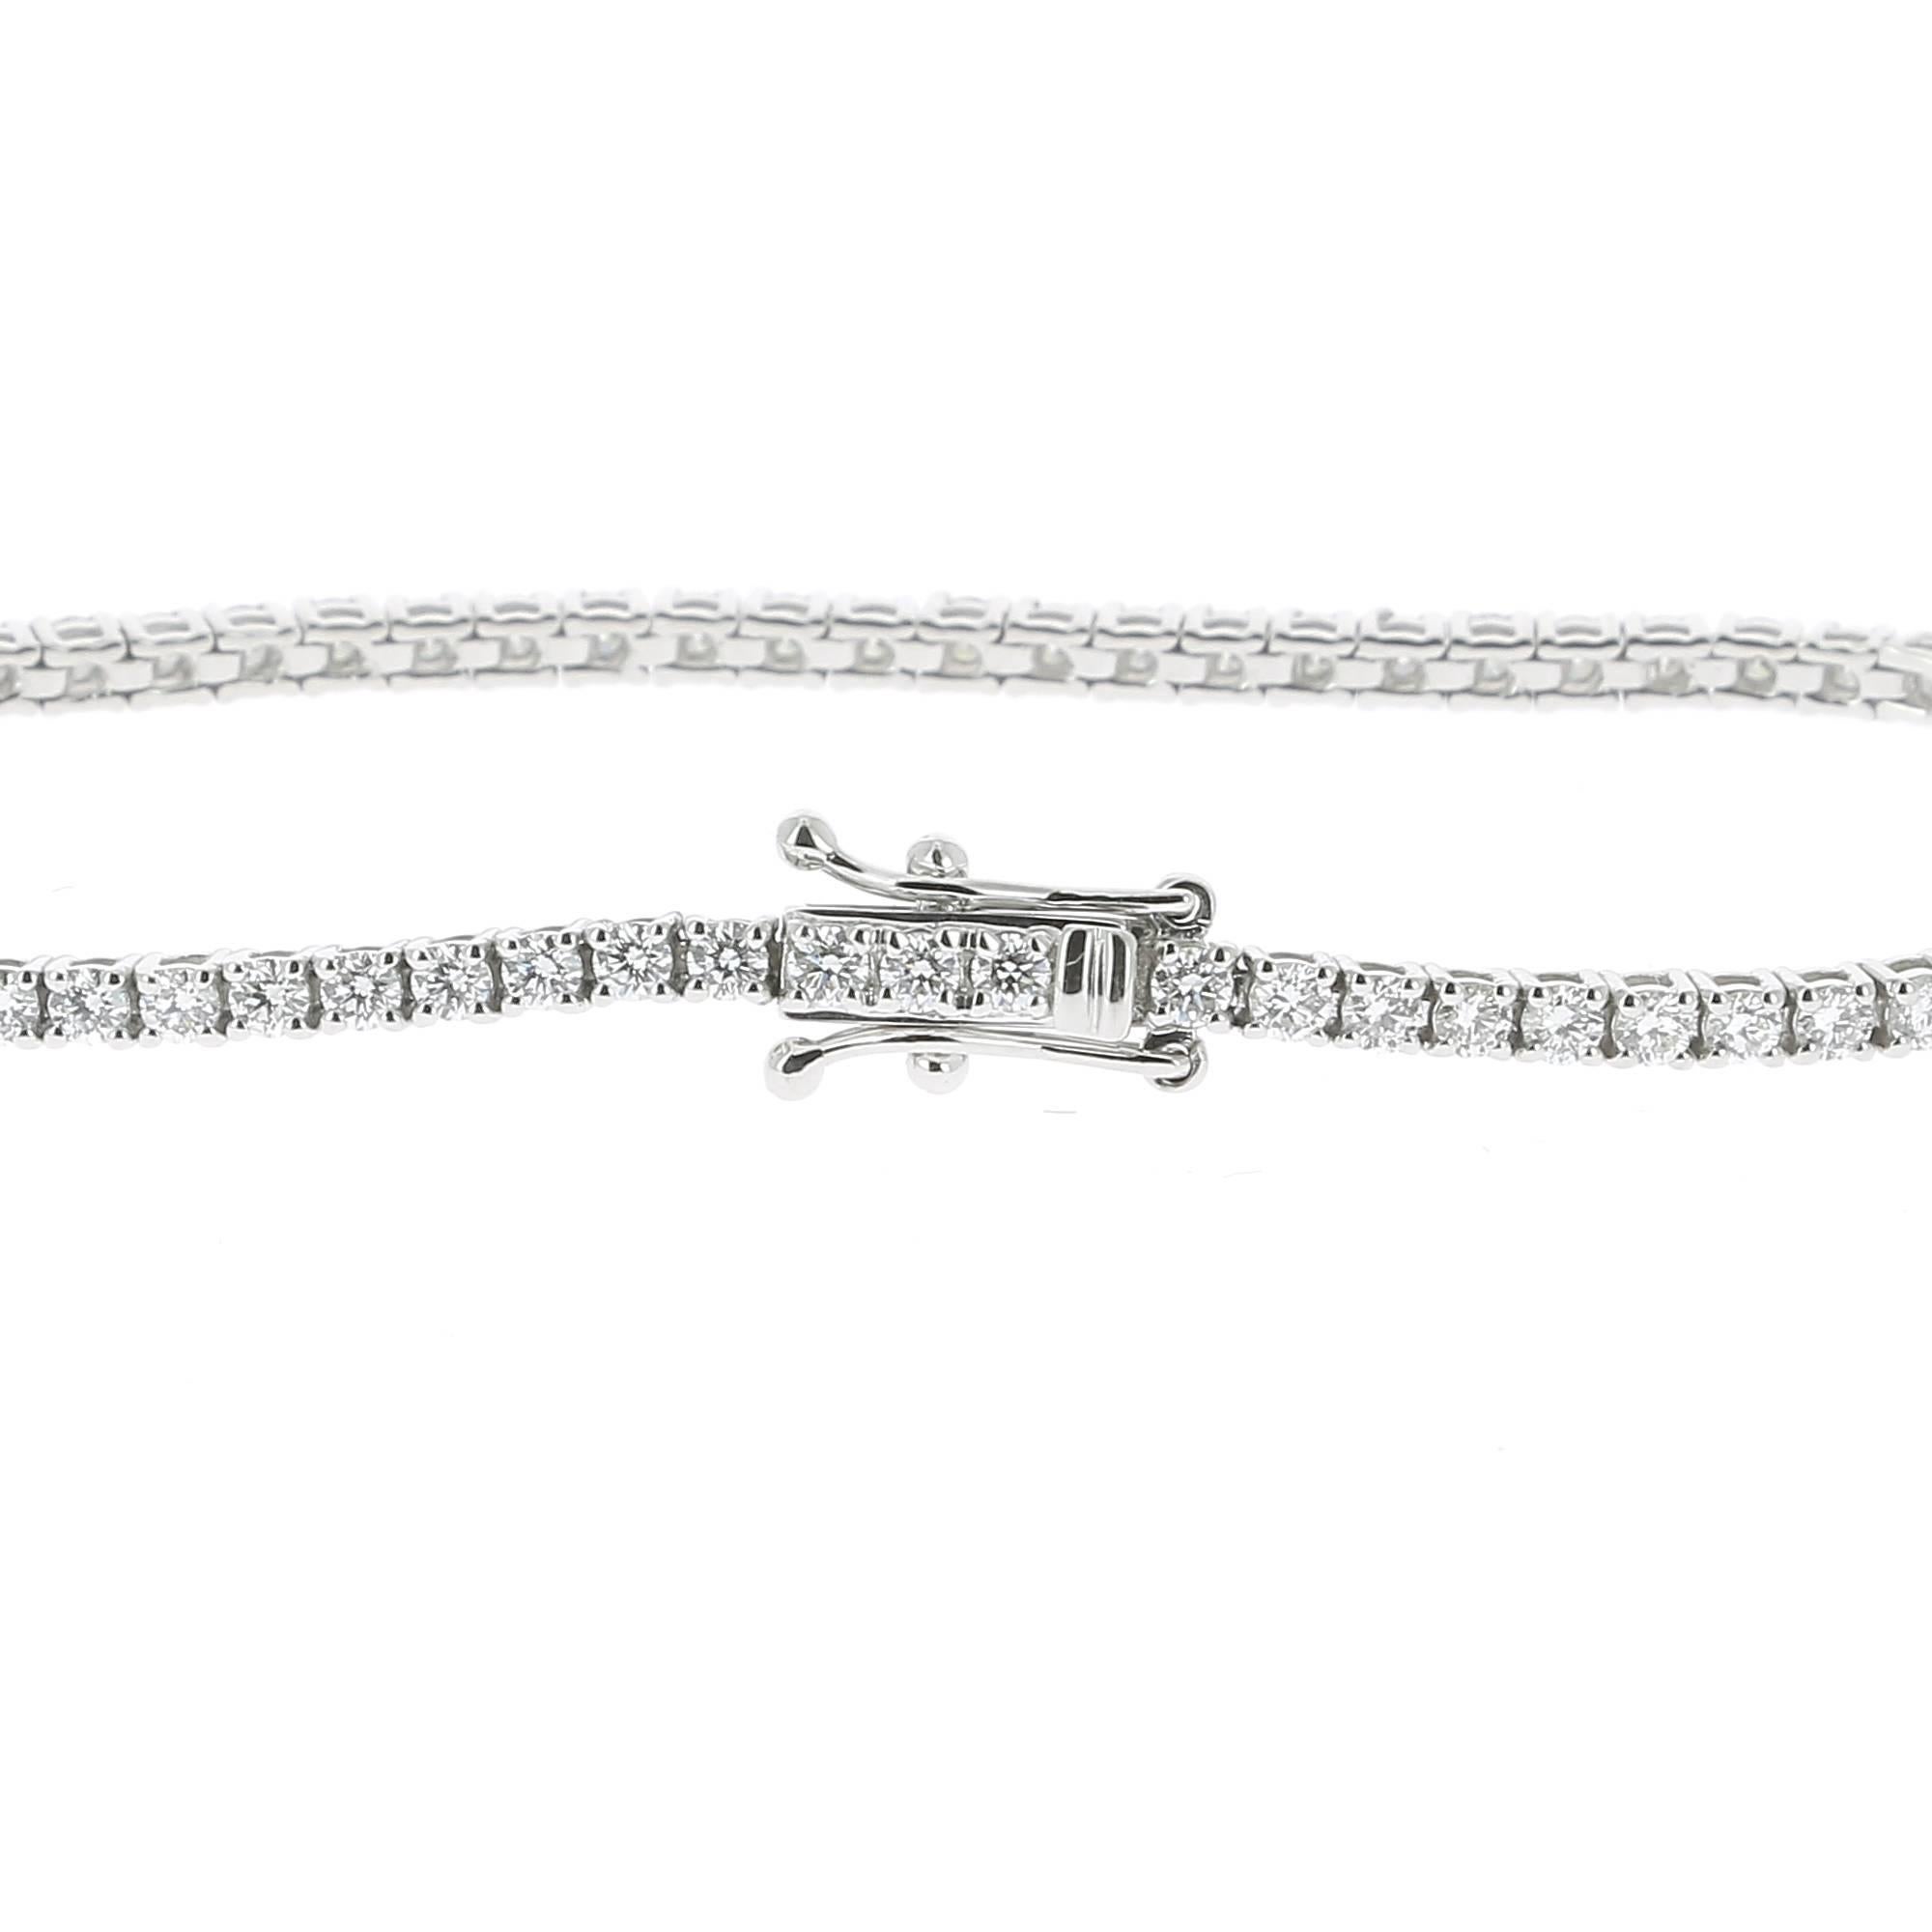 An amazing Diamond Tennis Bracelet is made with 80 Round-Cut Diamonds weighing 1,60 carats.
The Diamonds are GVS qualities.
The Length of the bracelet is 18 cm (7 In).
The Bracelet is 18K White Gold.
Also available in 18K Rose Gold and 18K Yellow